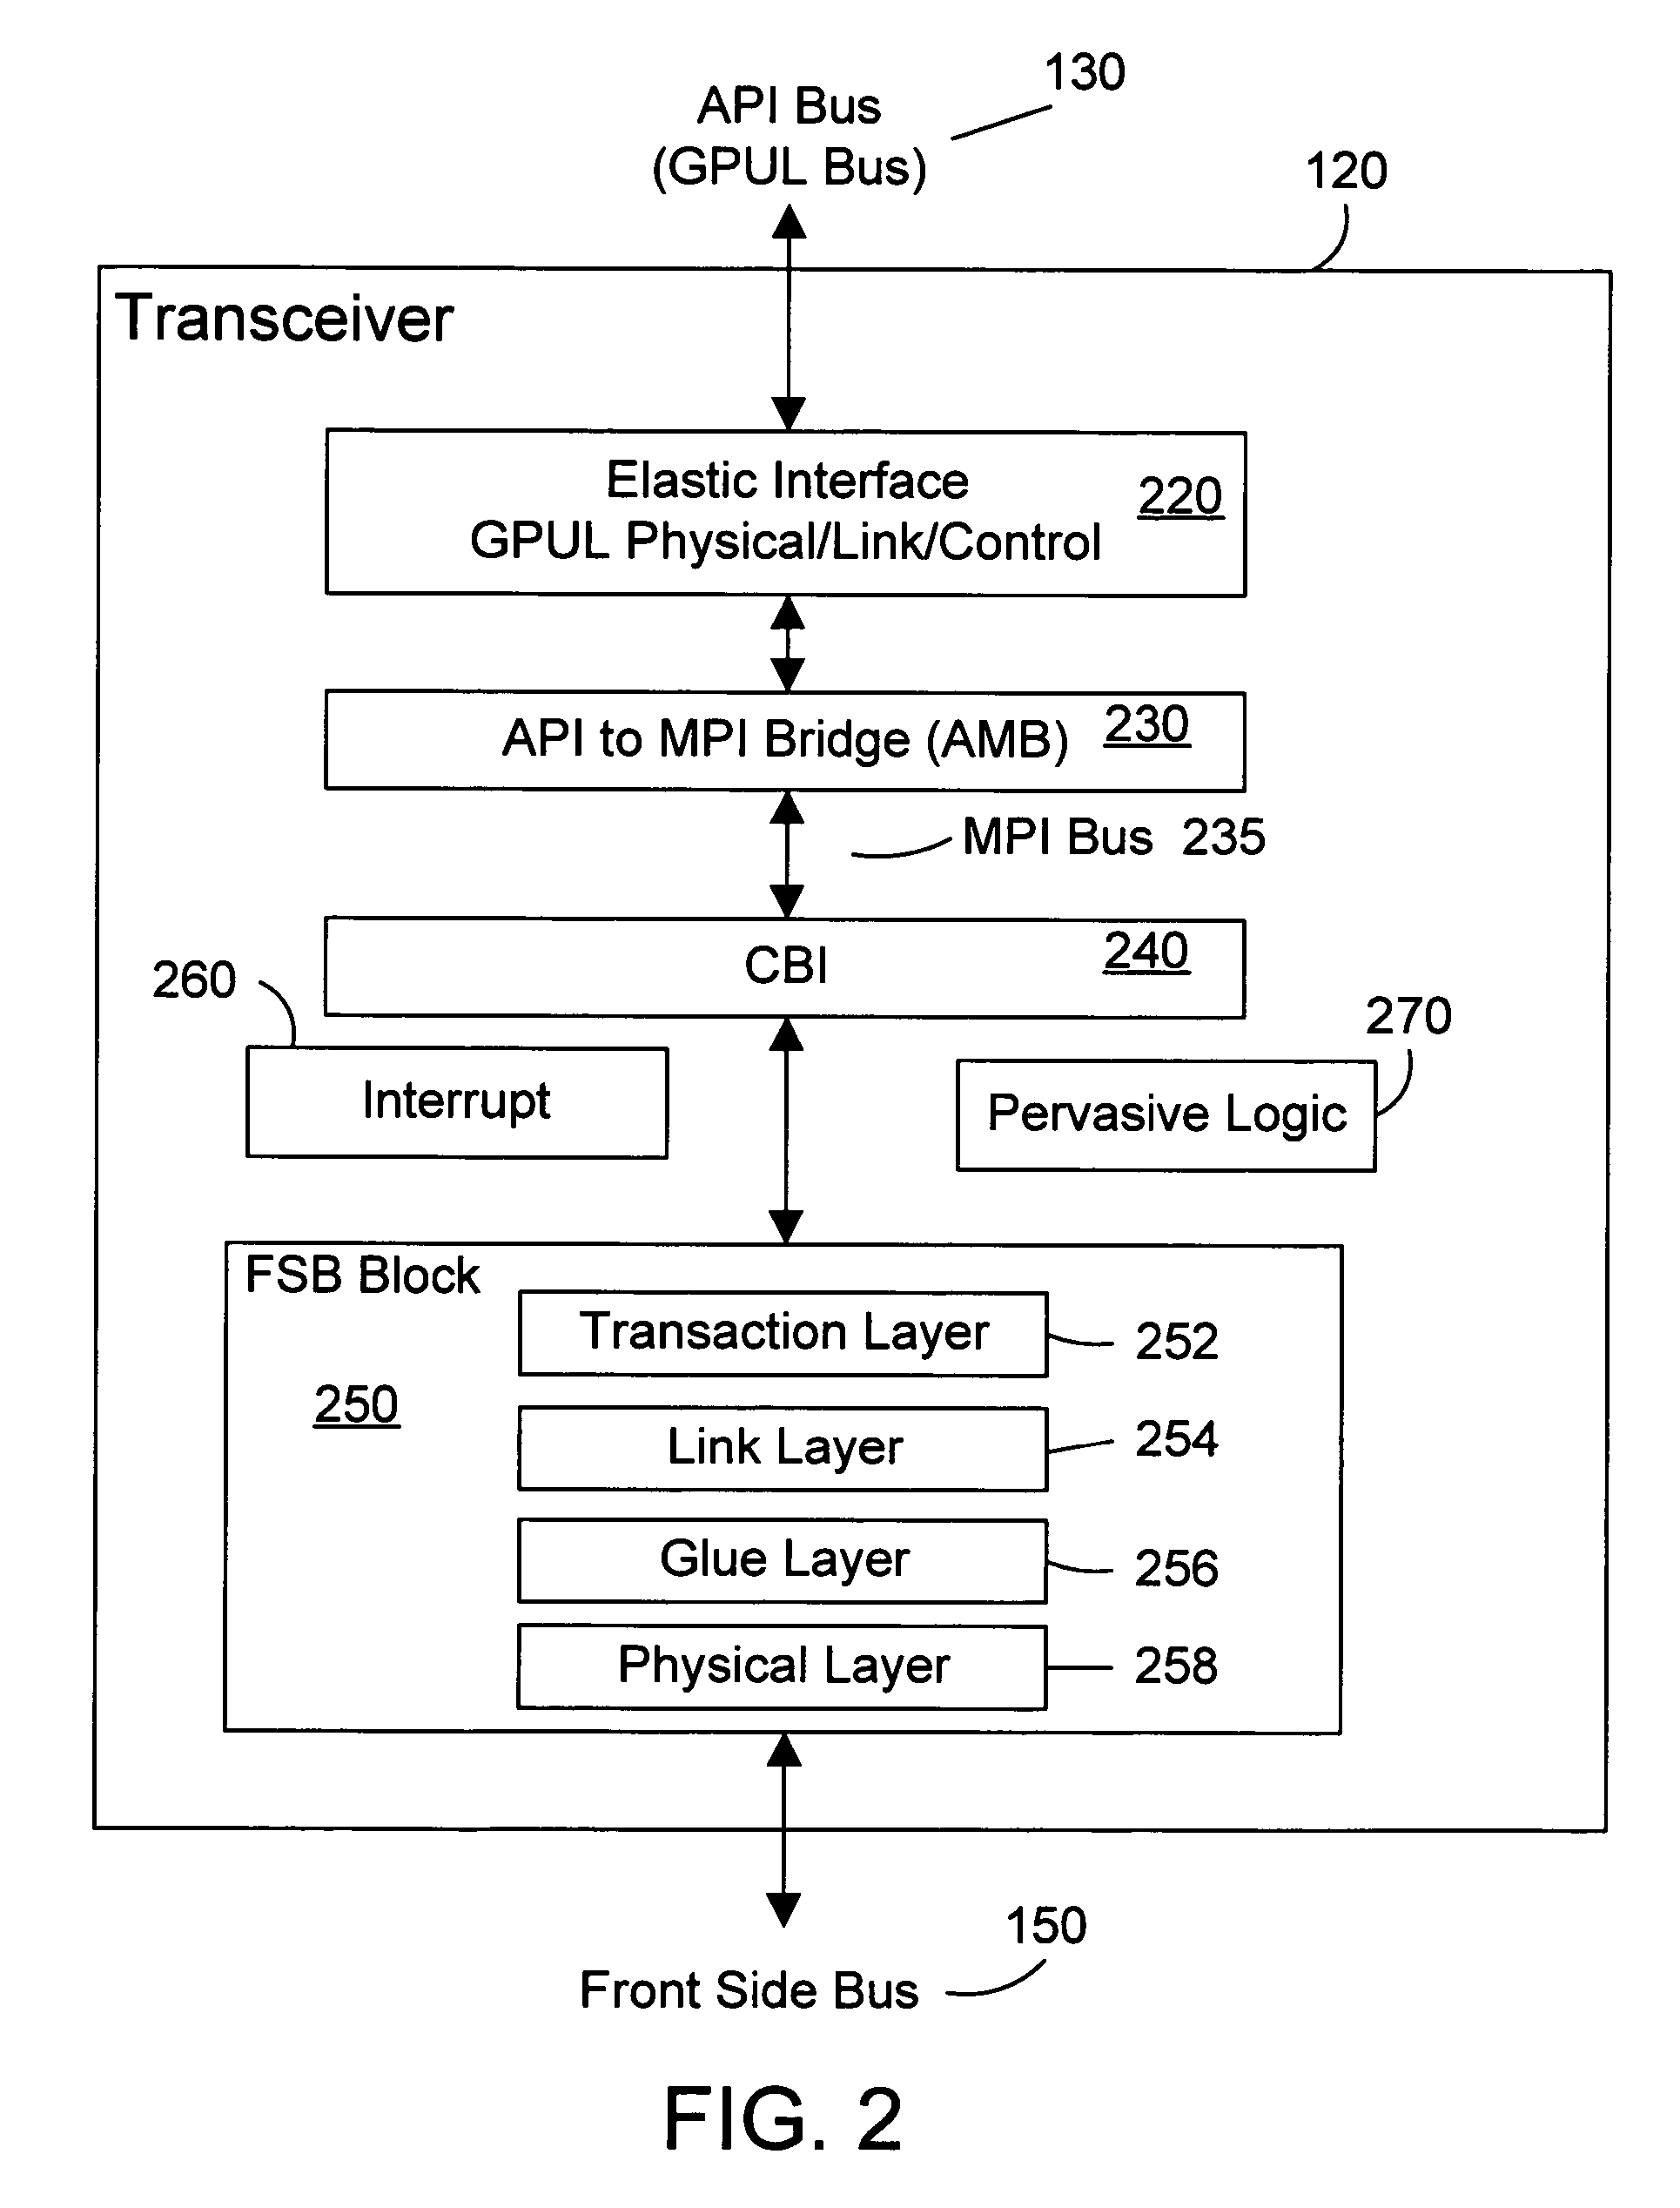 Computer system architecture for a processor connected to a high speed bus transceiver